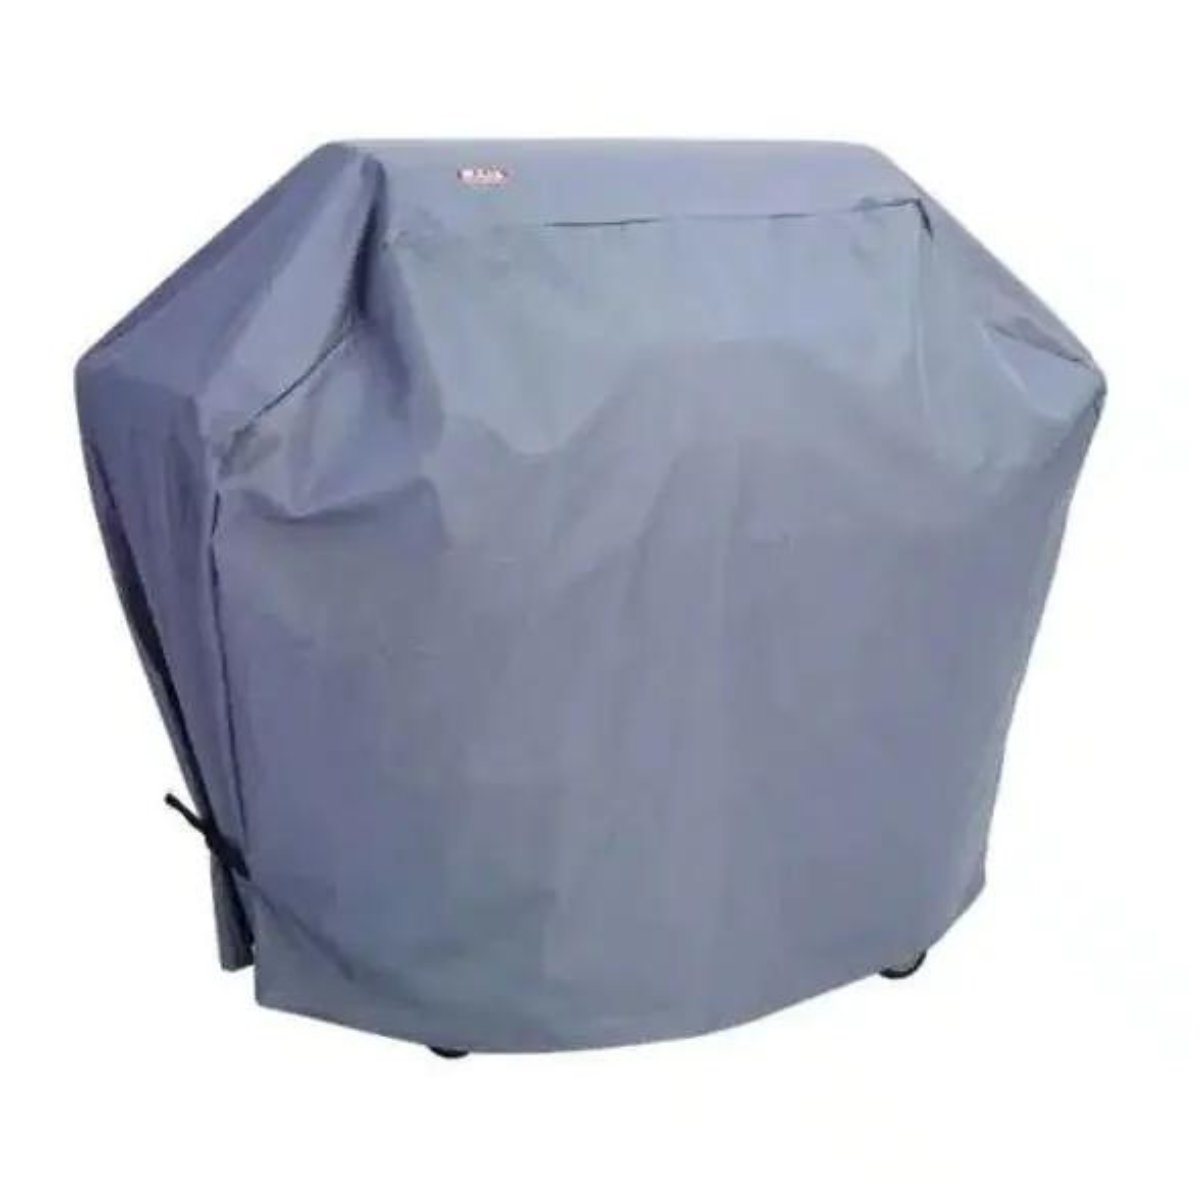 Sunbrella Cover For Bull Steer Grill With Cart - Kitchen In The Garden